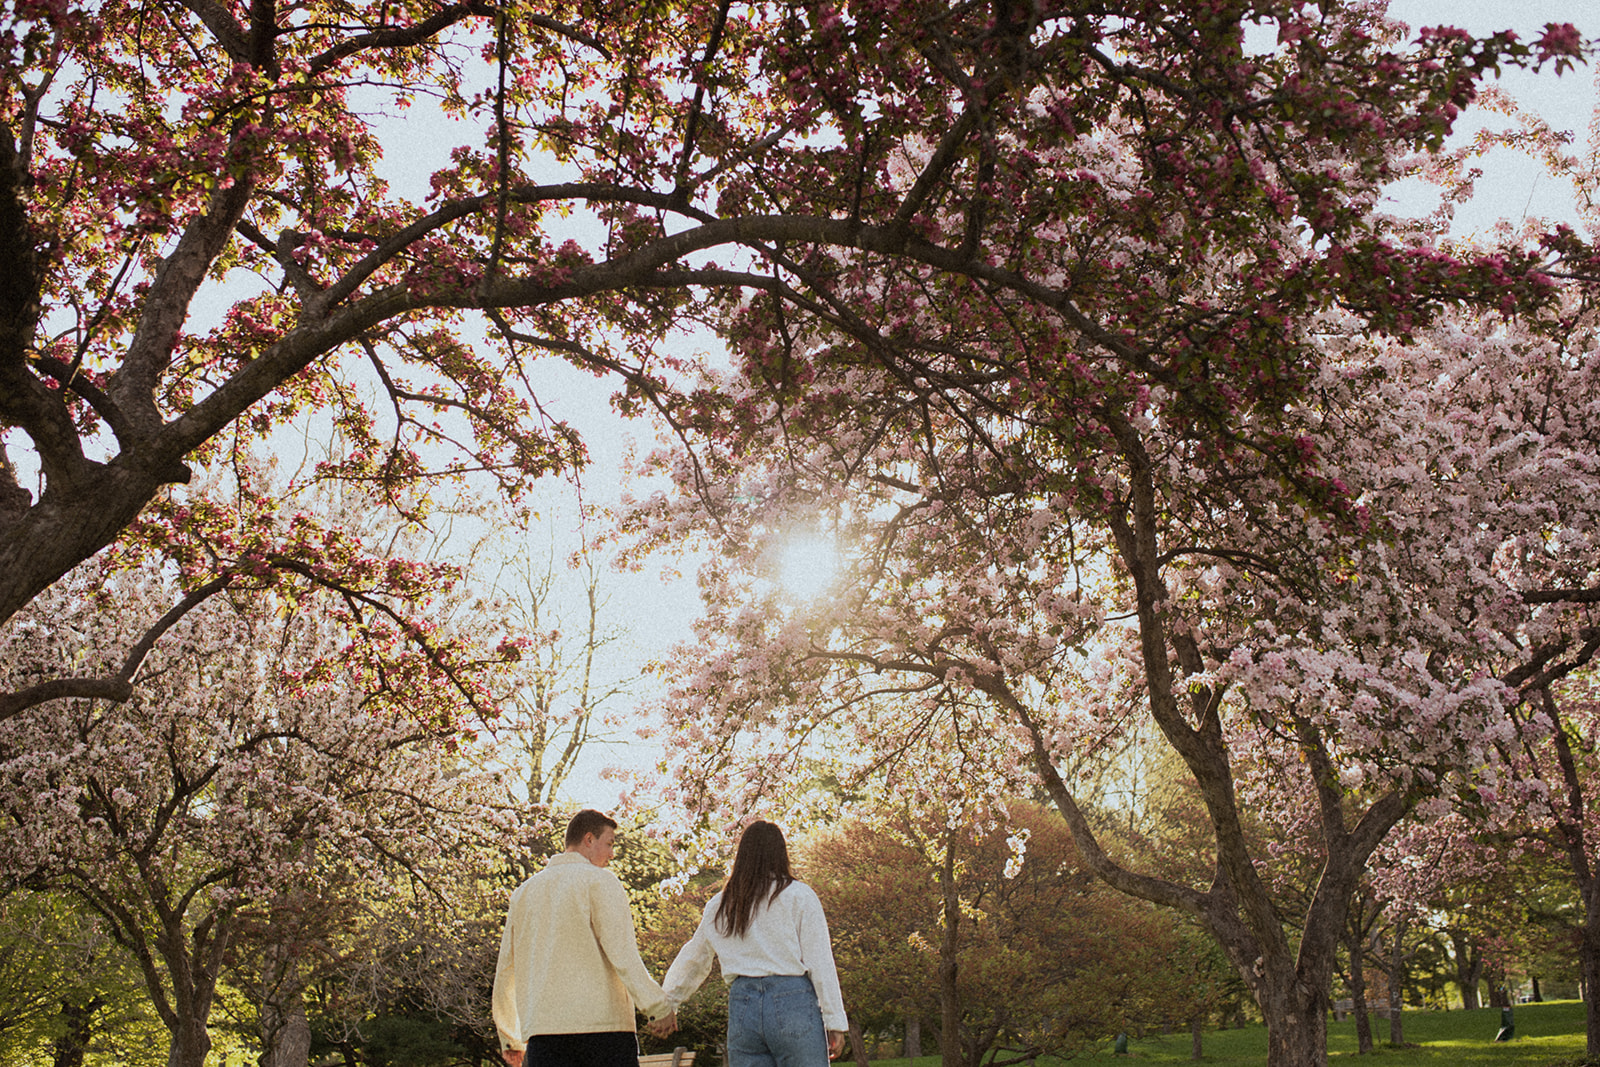 Romantic walking together hand in hand under the flowering trees at Lyndale Rose Garden